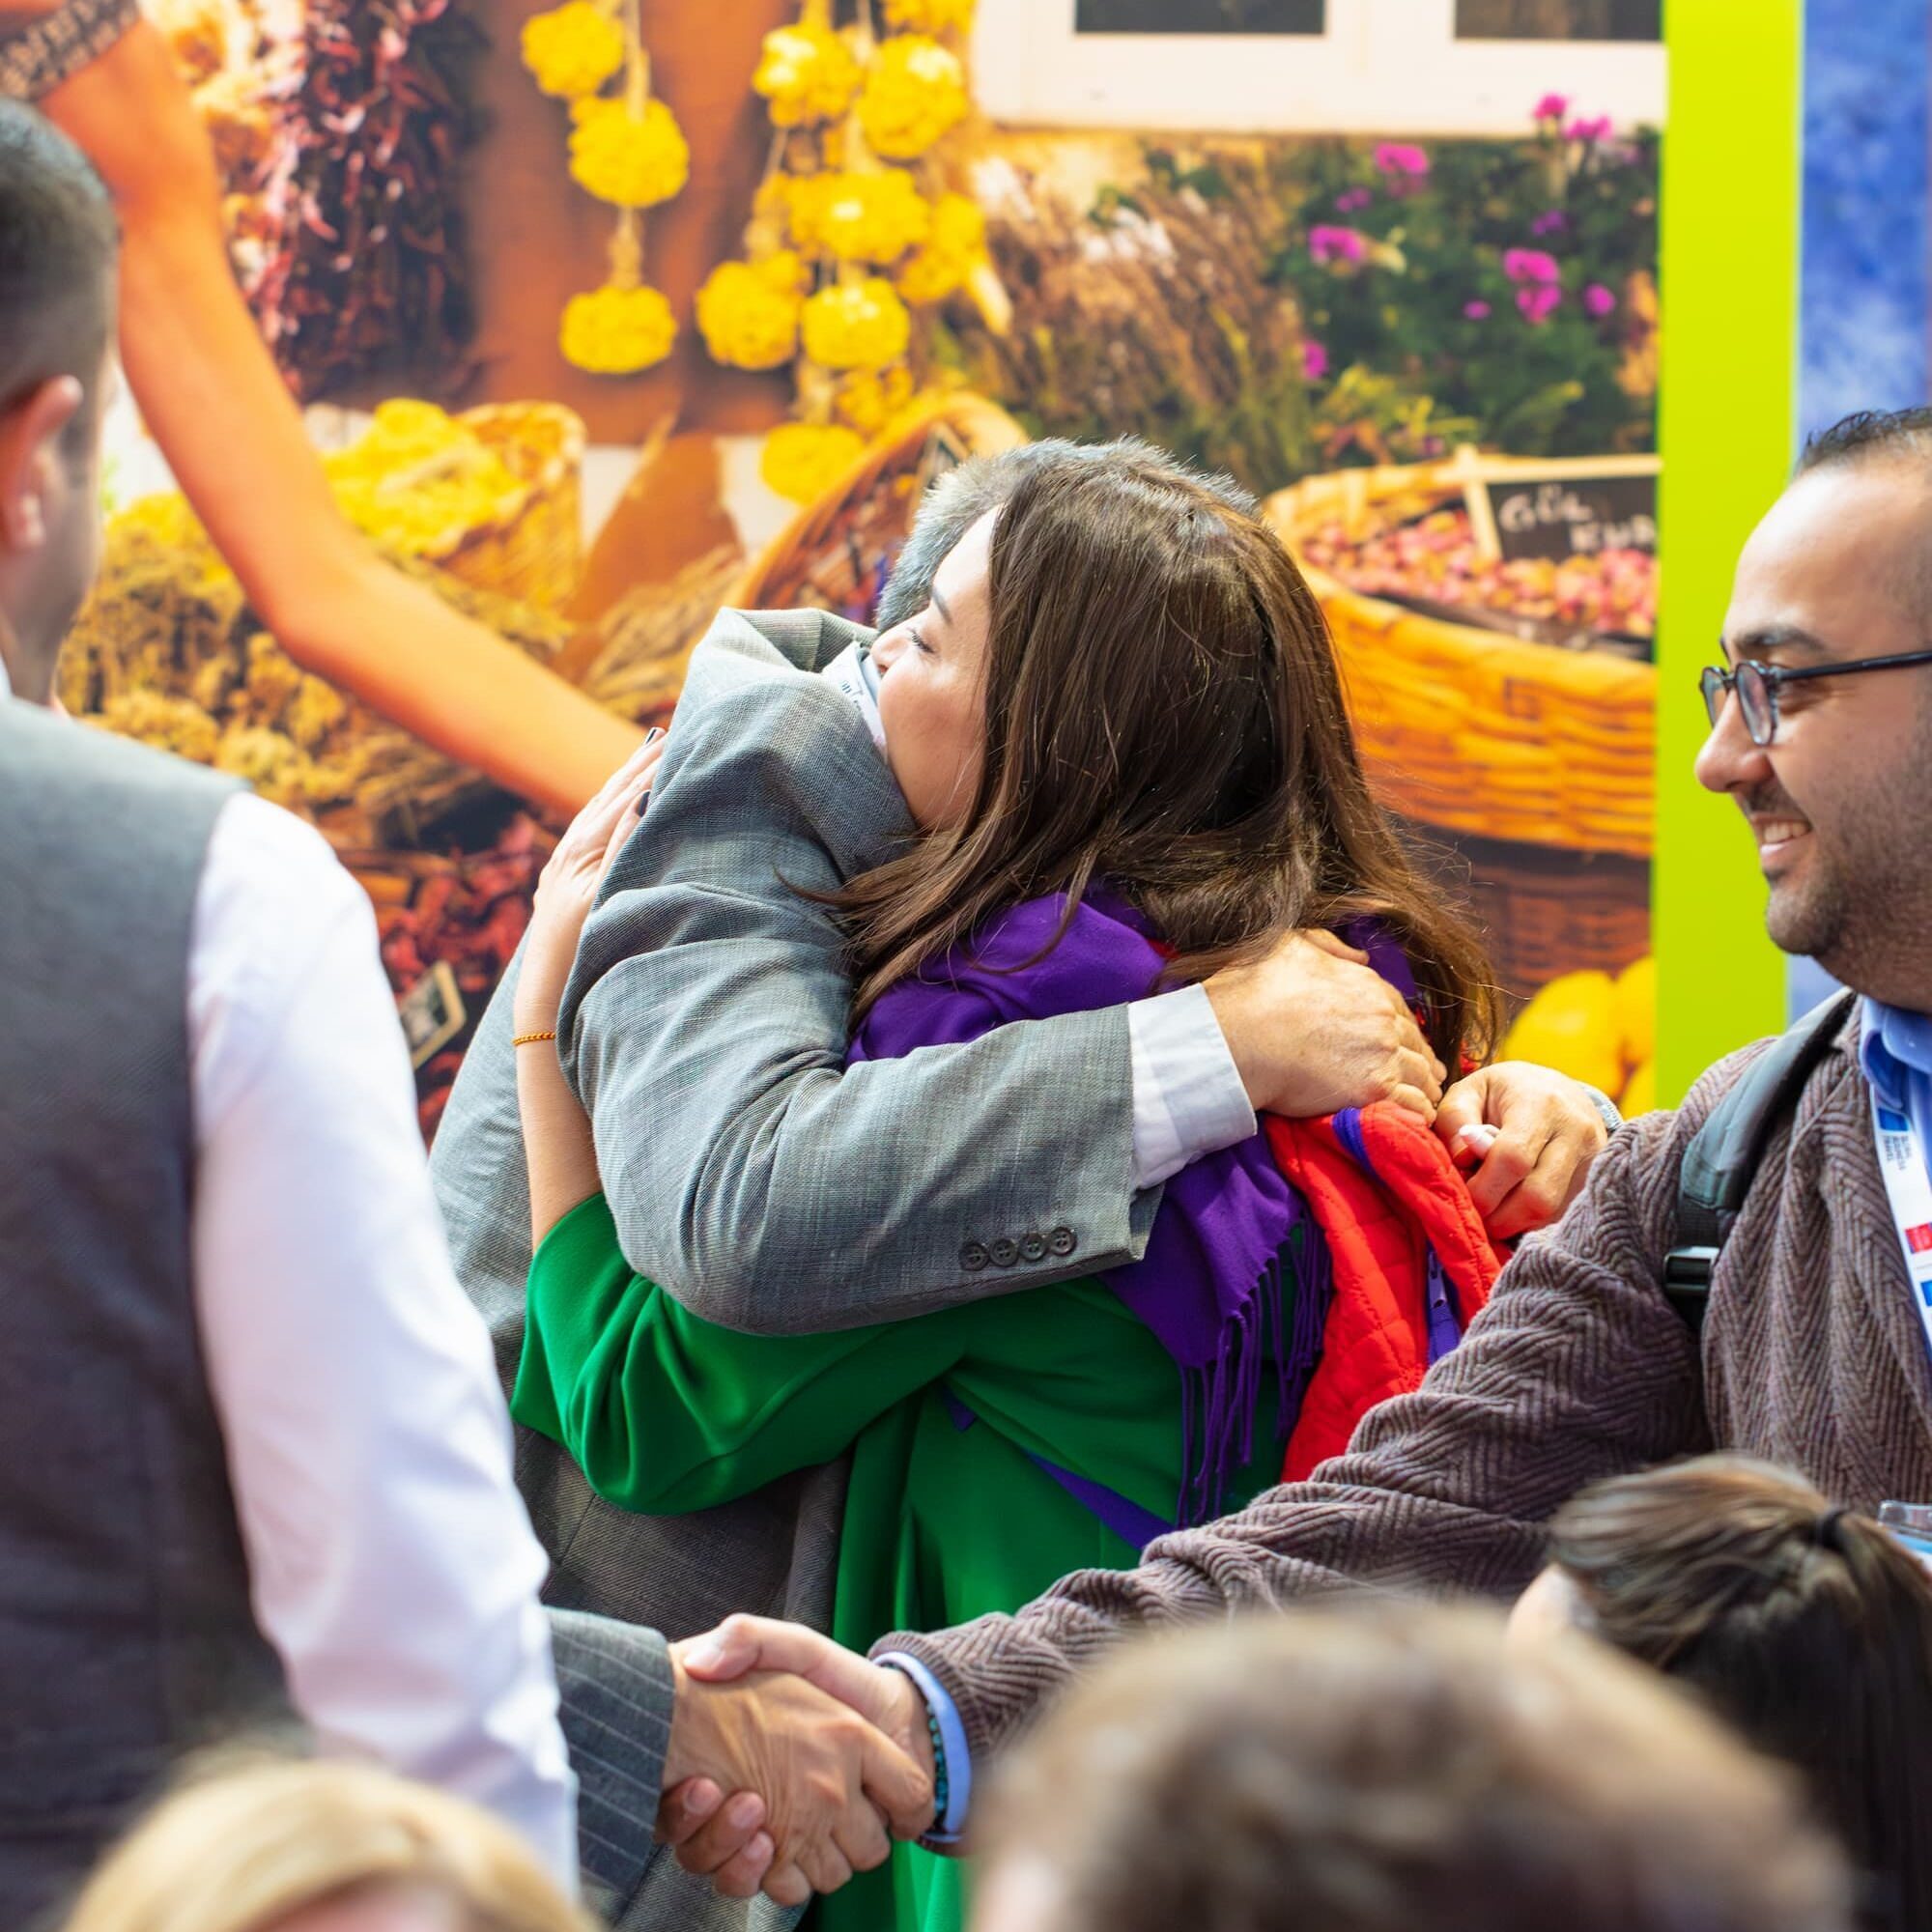 Wellbeing and connection at IMEX